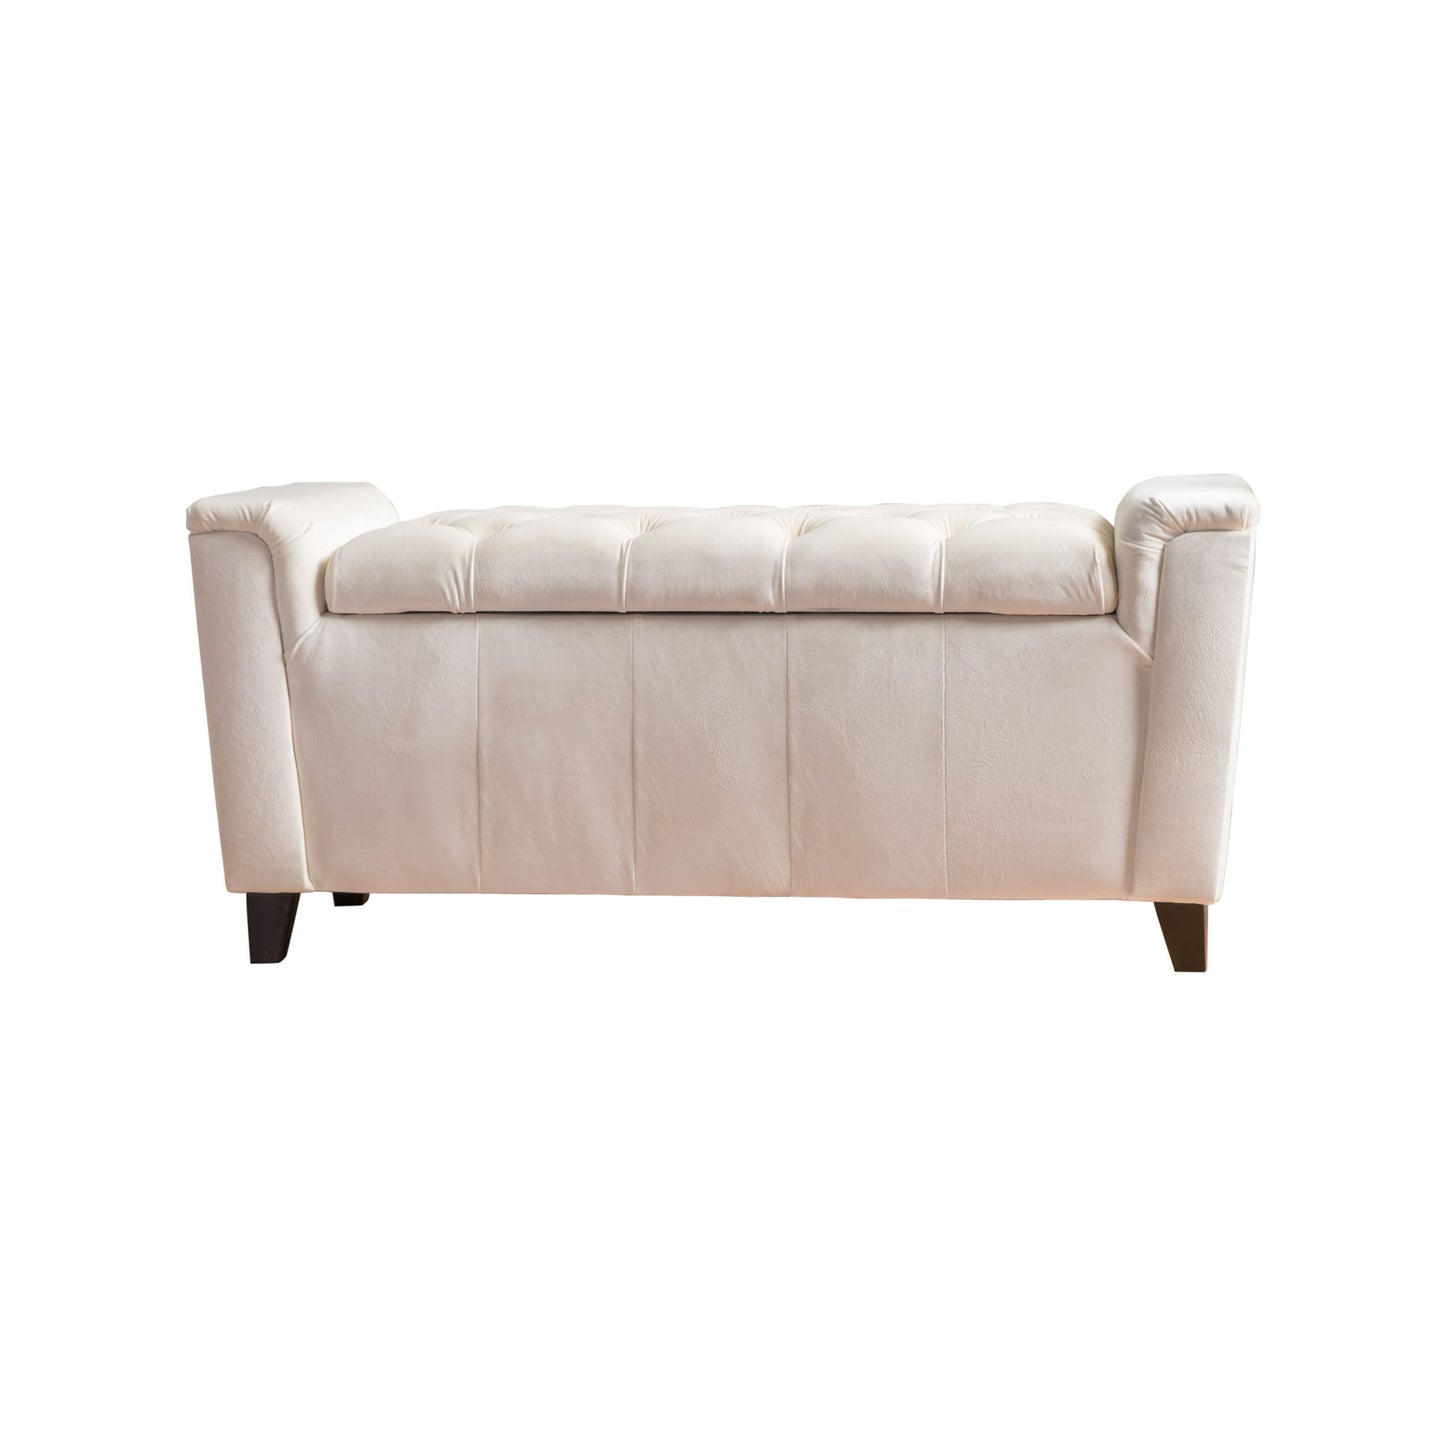 Perris Armed Storage Ottoman Bench